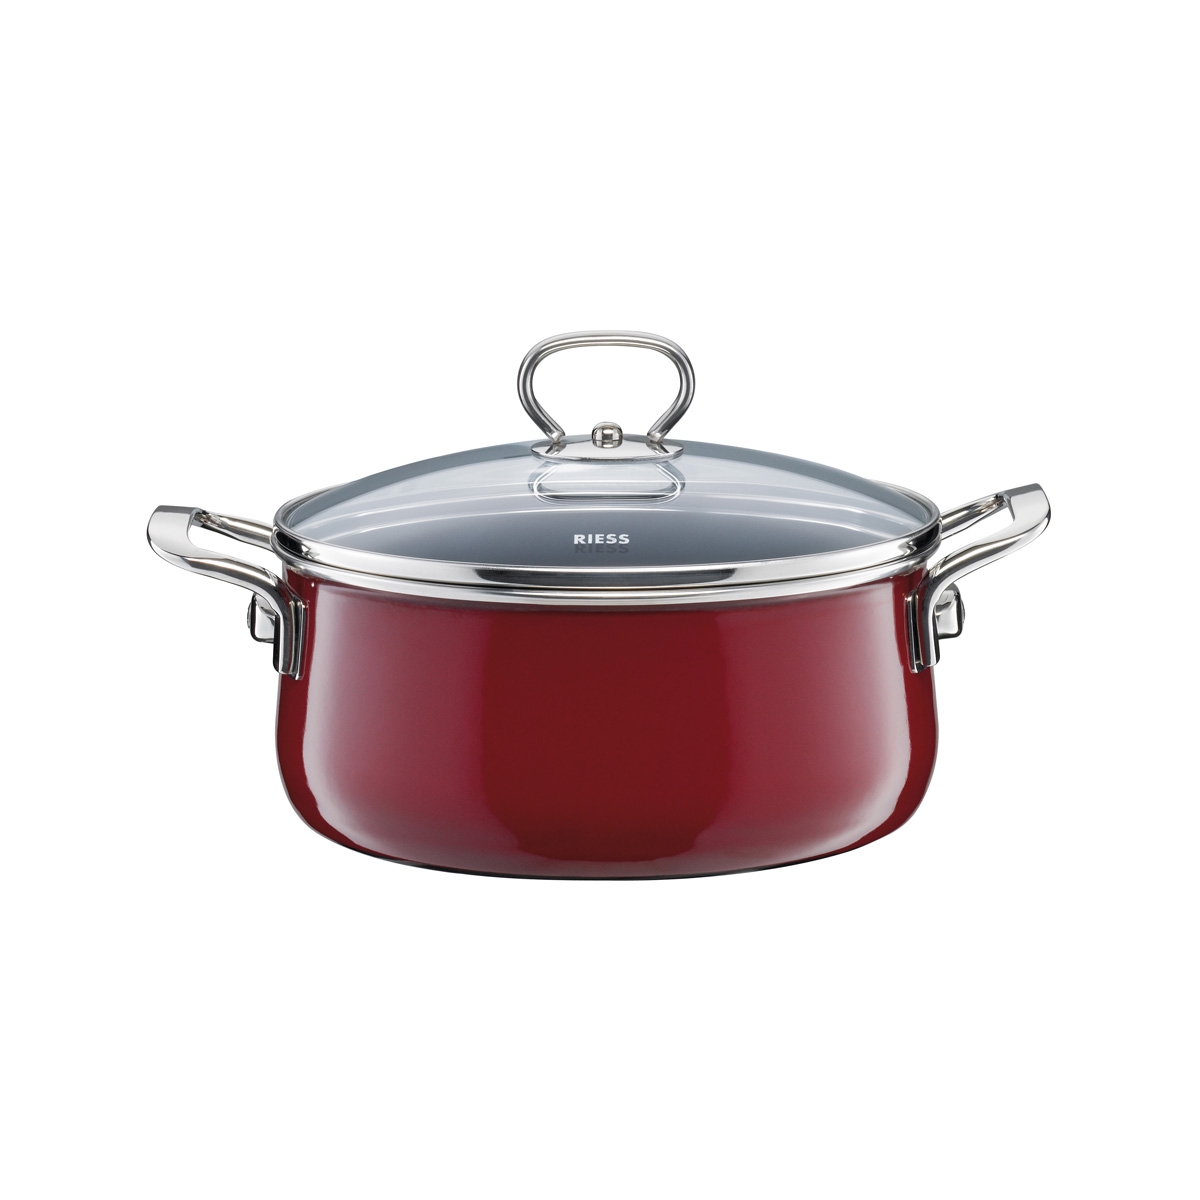 Riess Nouvelle Rosso extra stark Kasserolle mit Glasdeckel 20 cm / 2,0 L - Emaille